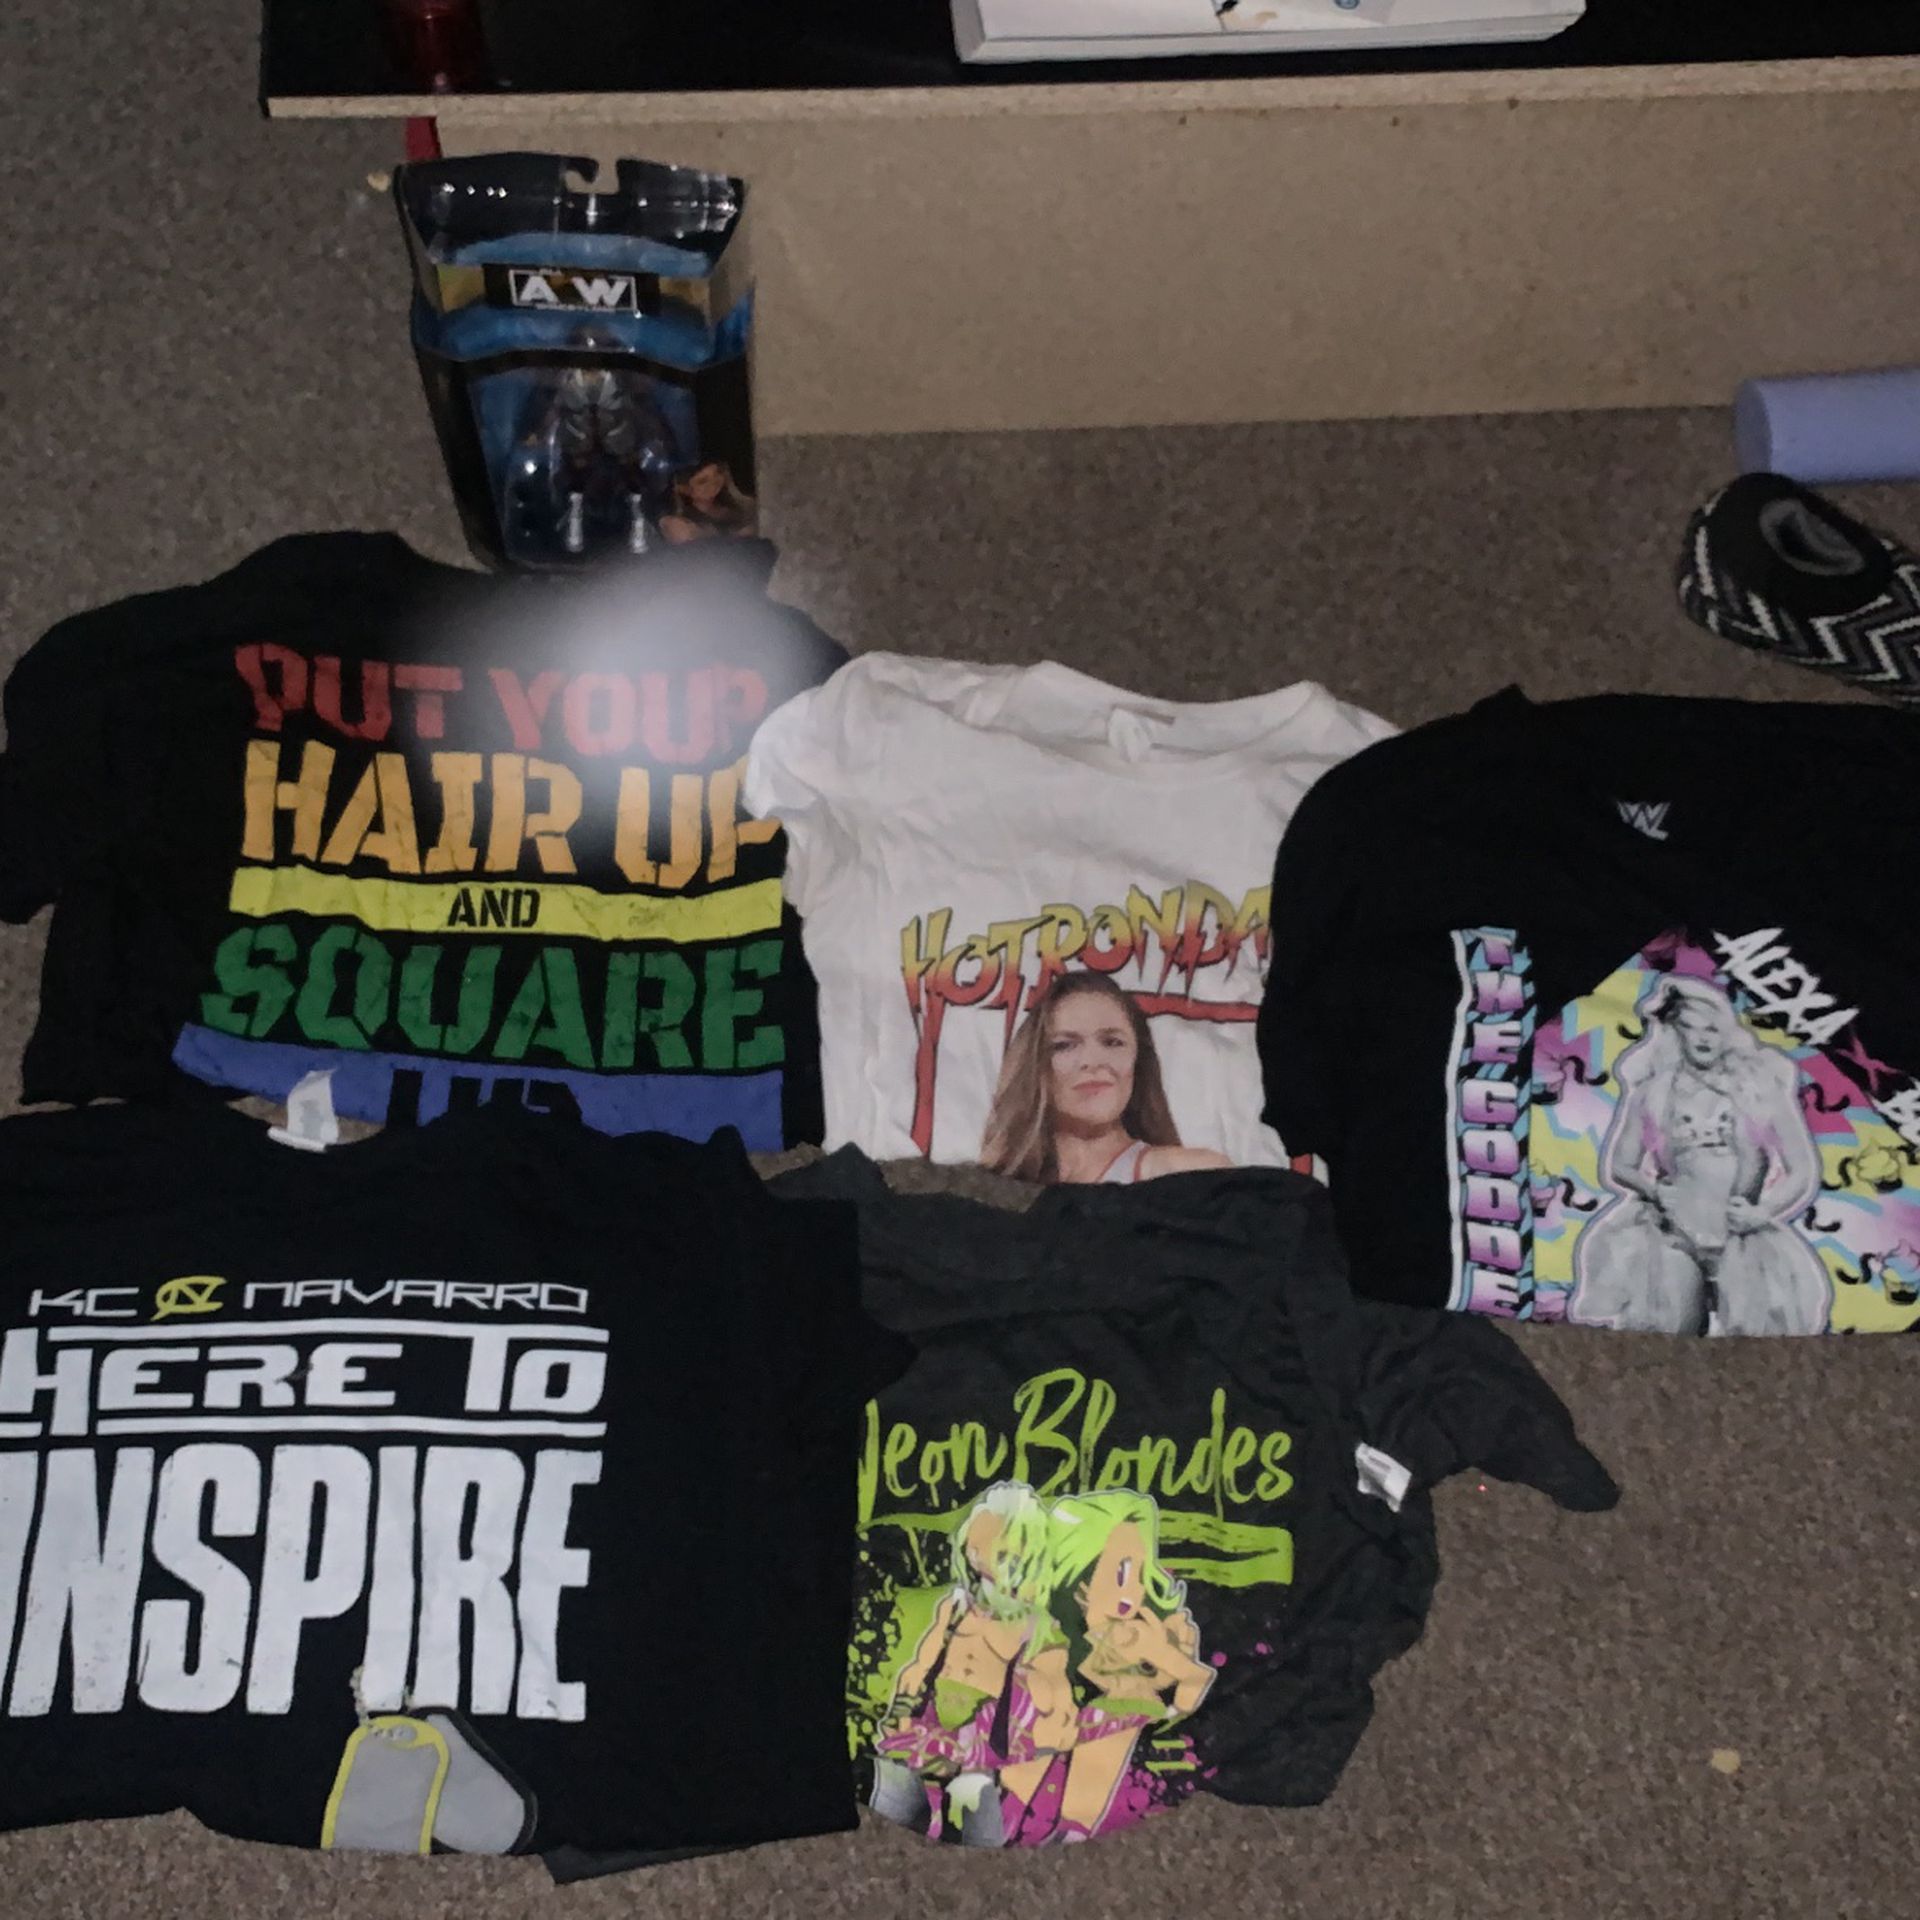 wrestling shirts and aew figure